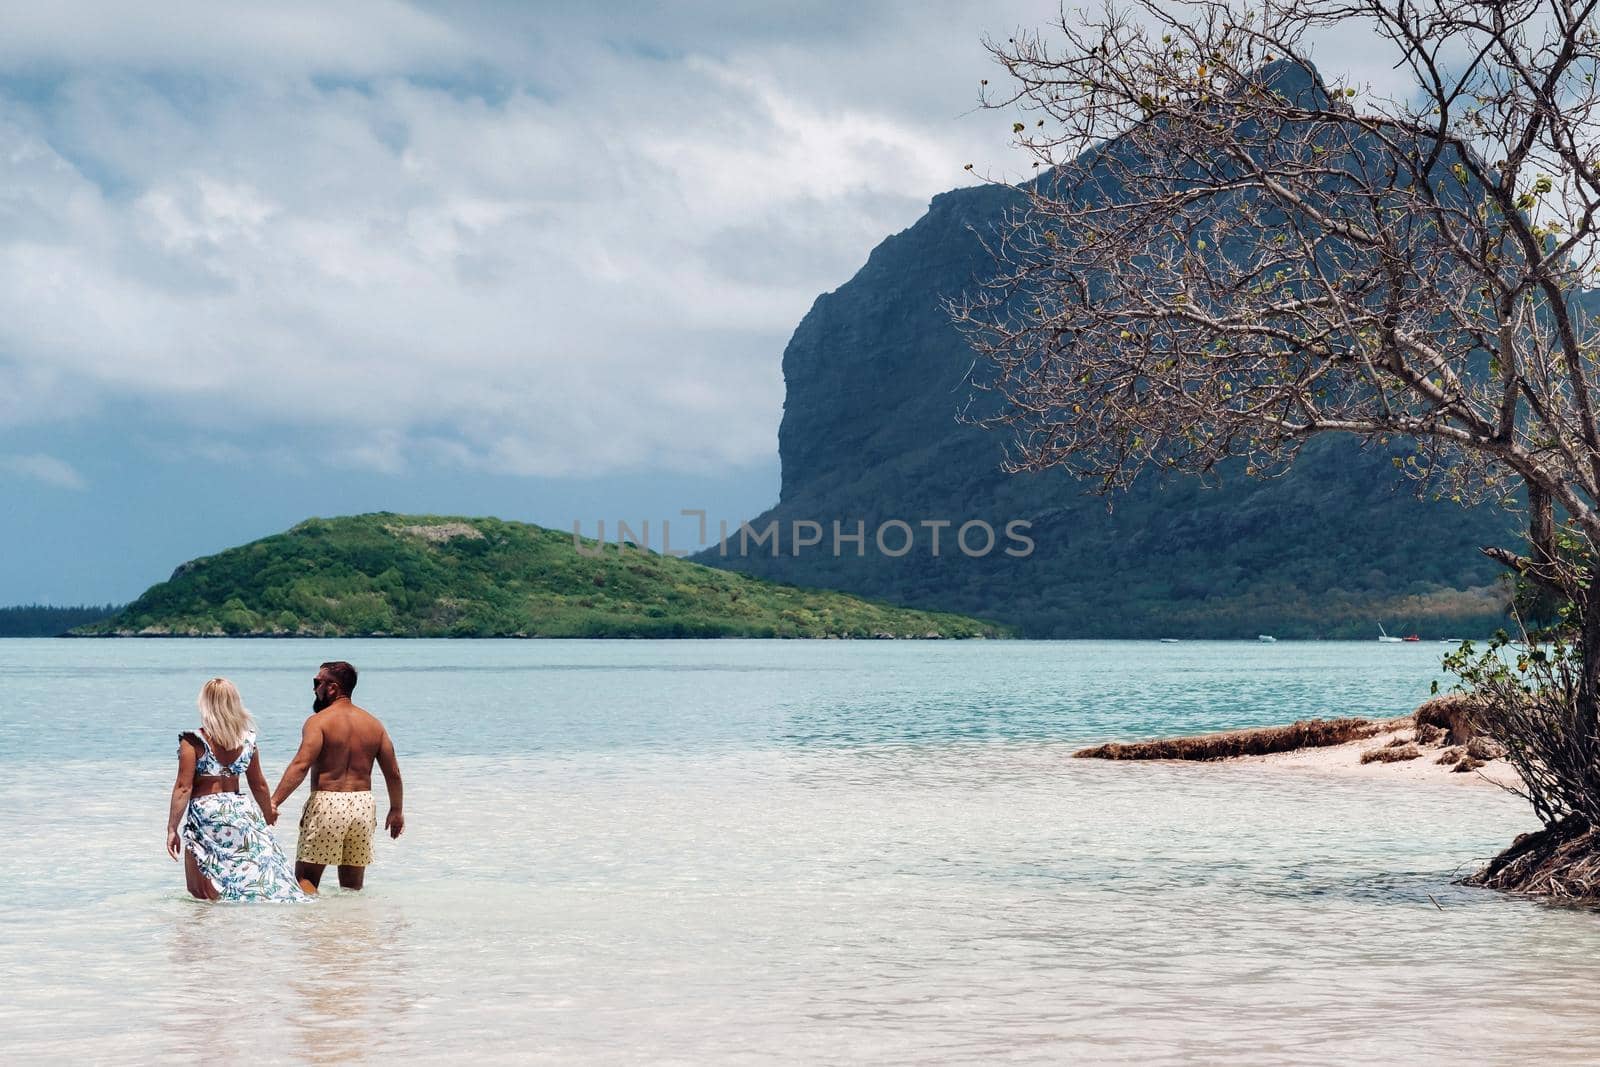 A girl in a swimsuit and a man in shorts stand in the ocean against the backdrop of mount Le Morne on the island of Mauritius.A couple in the water look into the distance of the ocean against the background of mount Le Morne Brabant by Lobachad